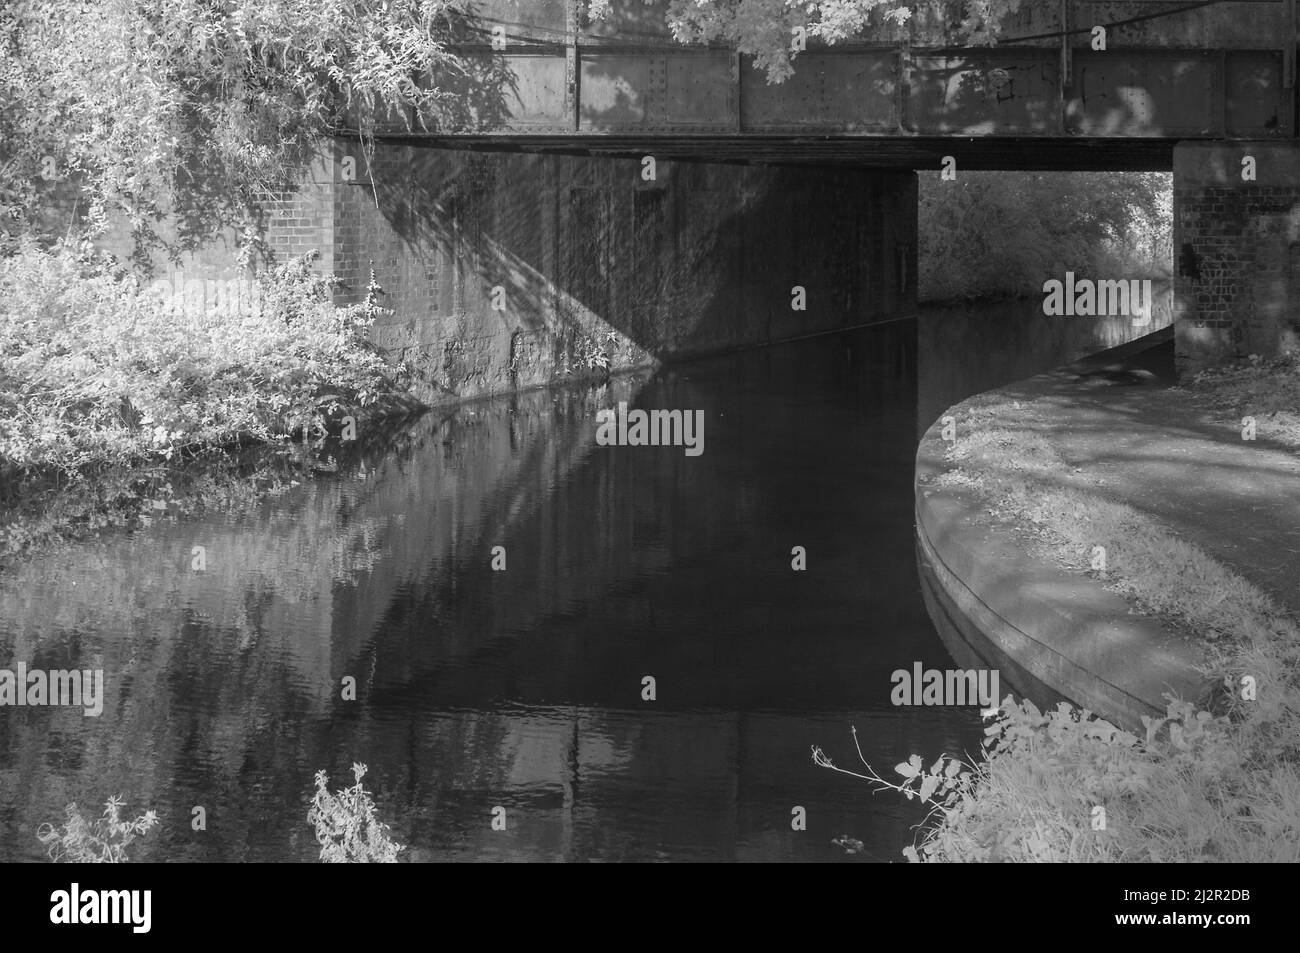 Infrared picture looking under the railway bridge on the Bridgewater and Taunton Canal in Taunton, Somerset, England, UK. part of the East Deane Way. Stock Photo